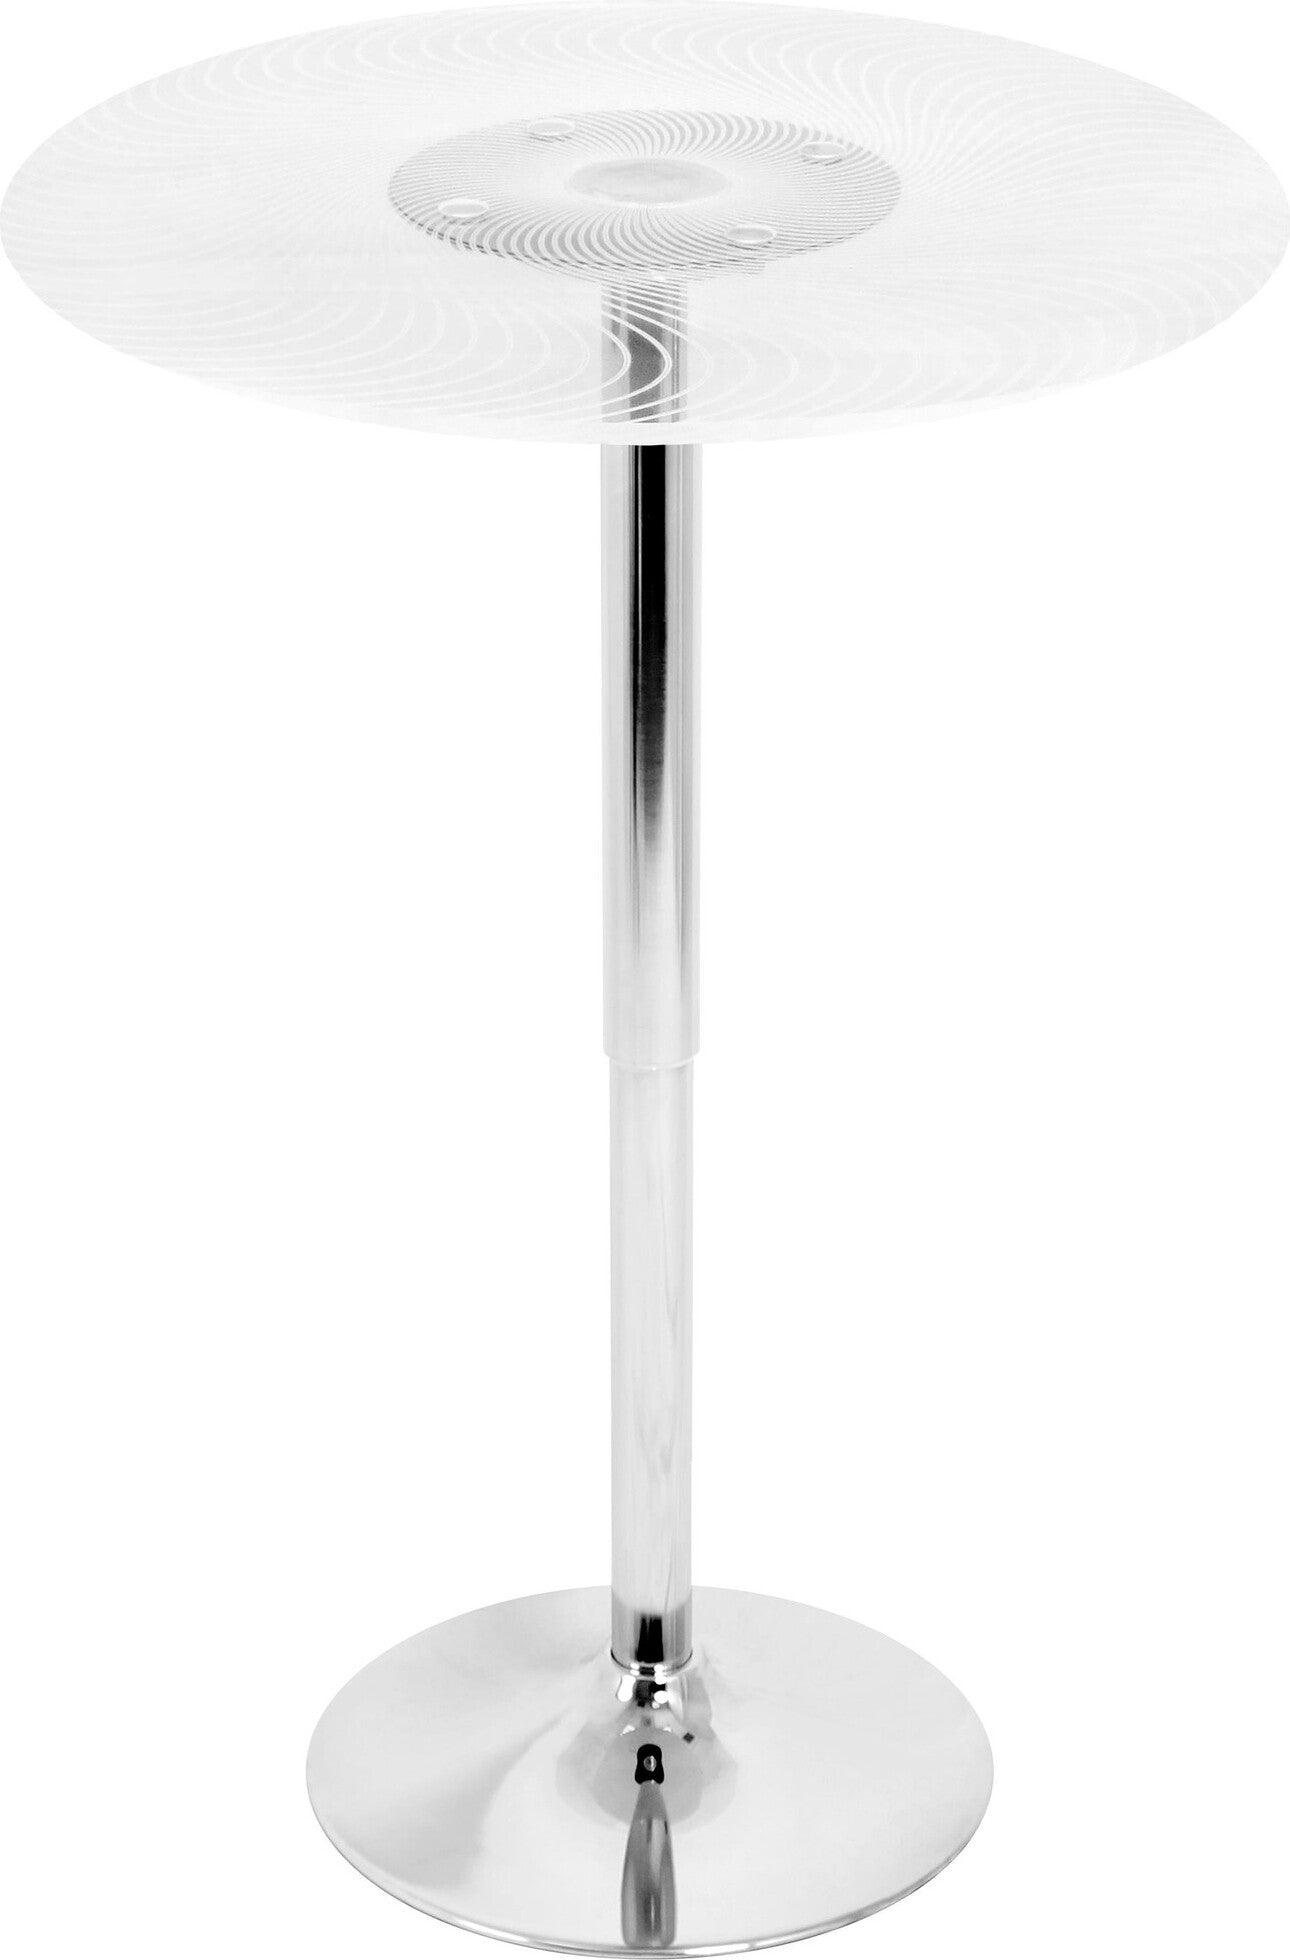 Lumisource Bar Tables - Spyra Contemporary Light Up Adjustable Bar Table